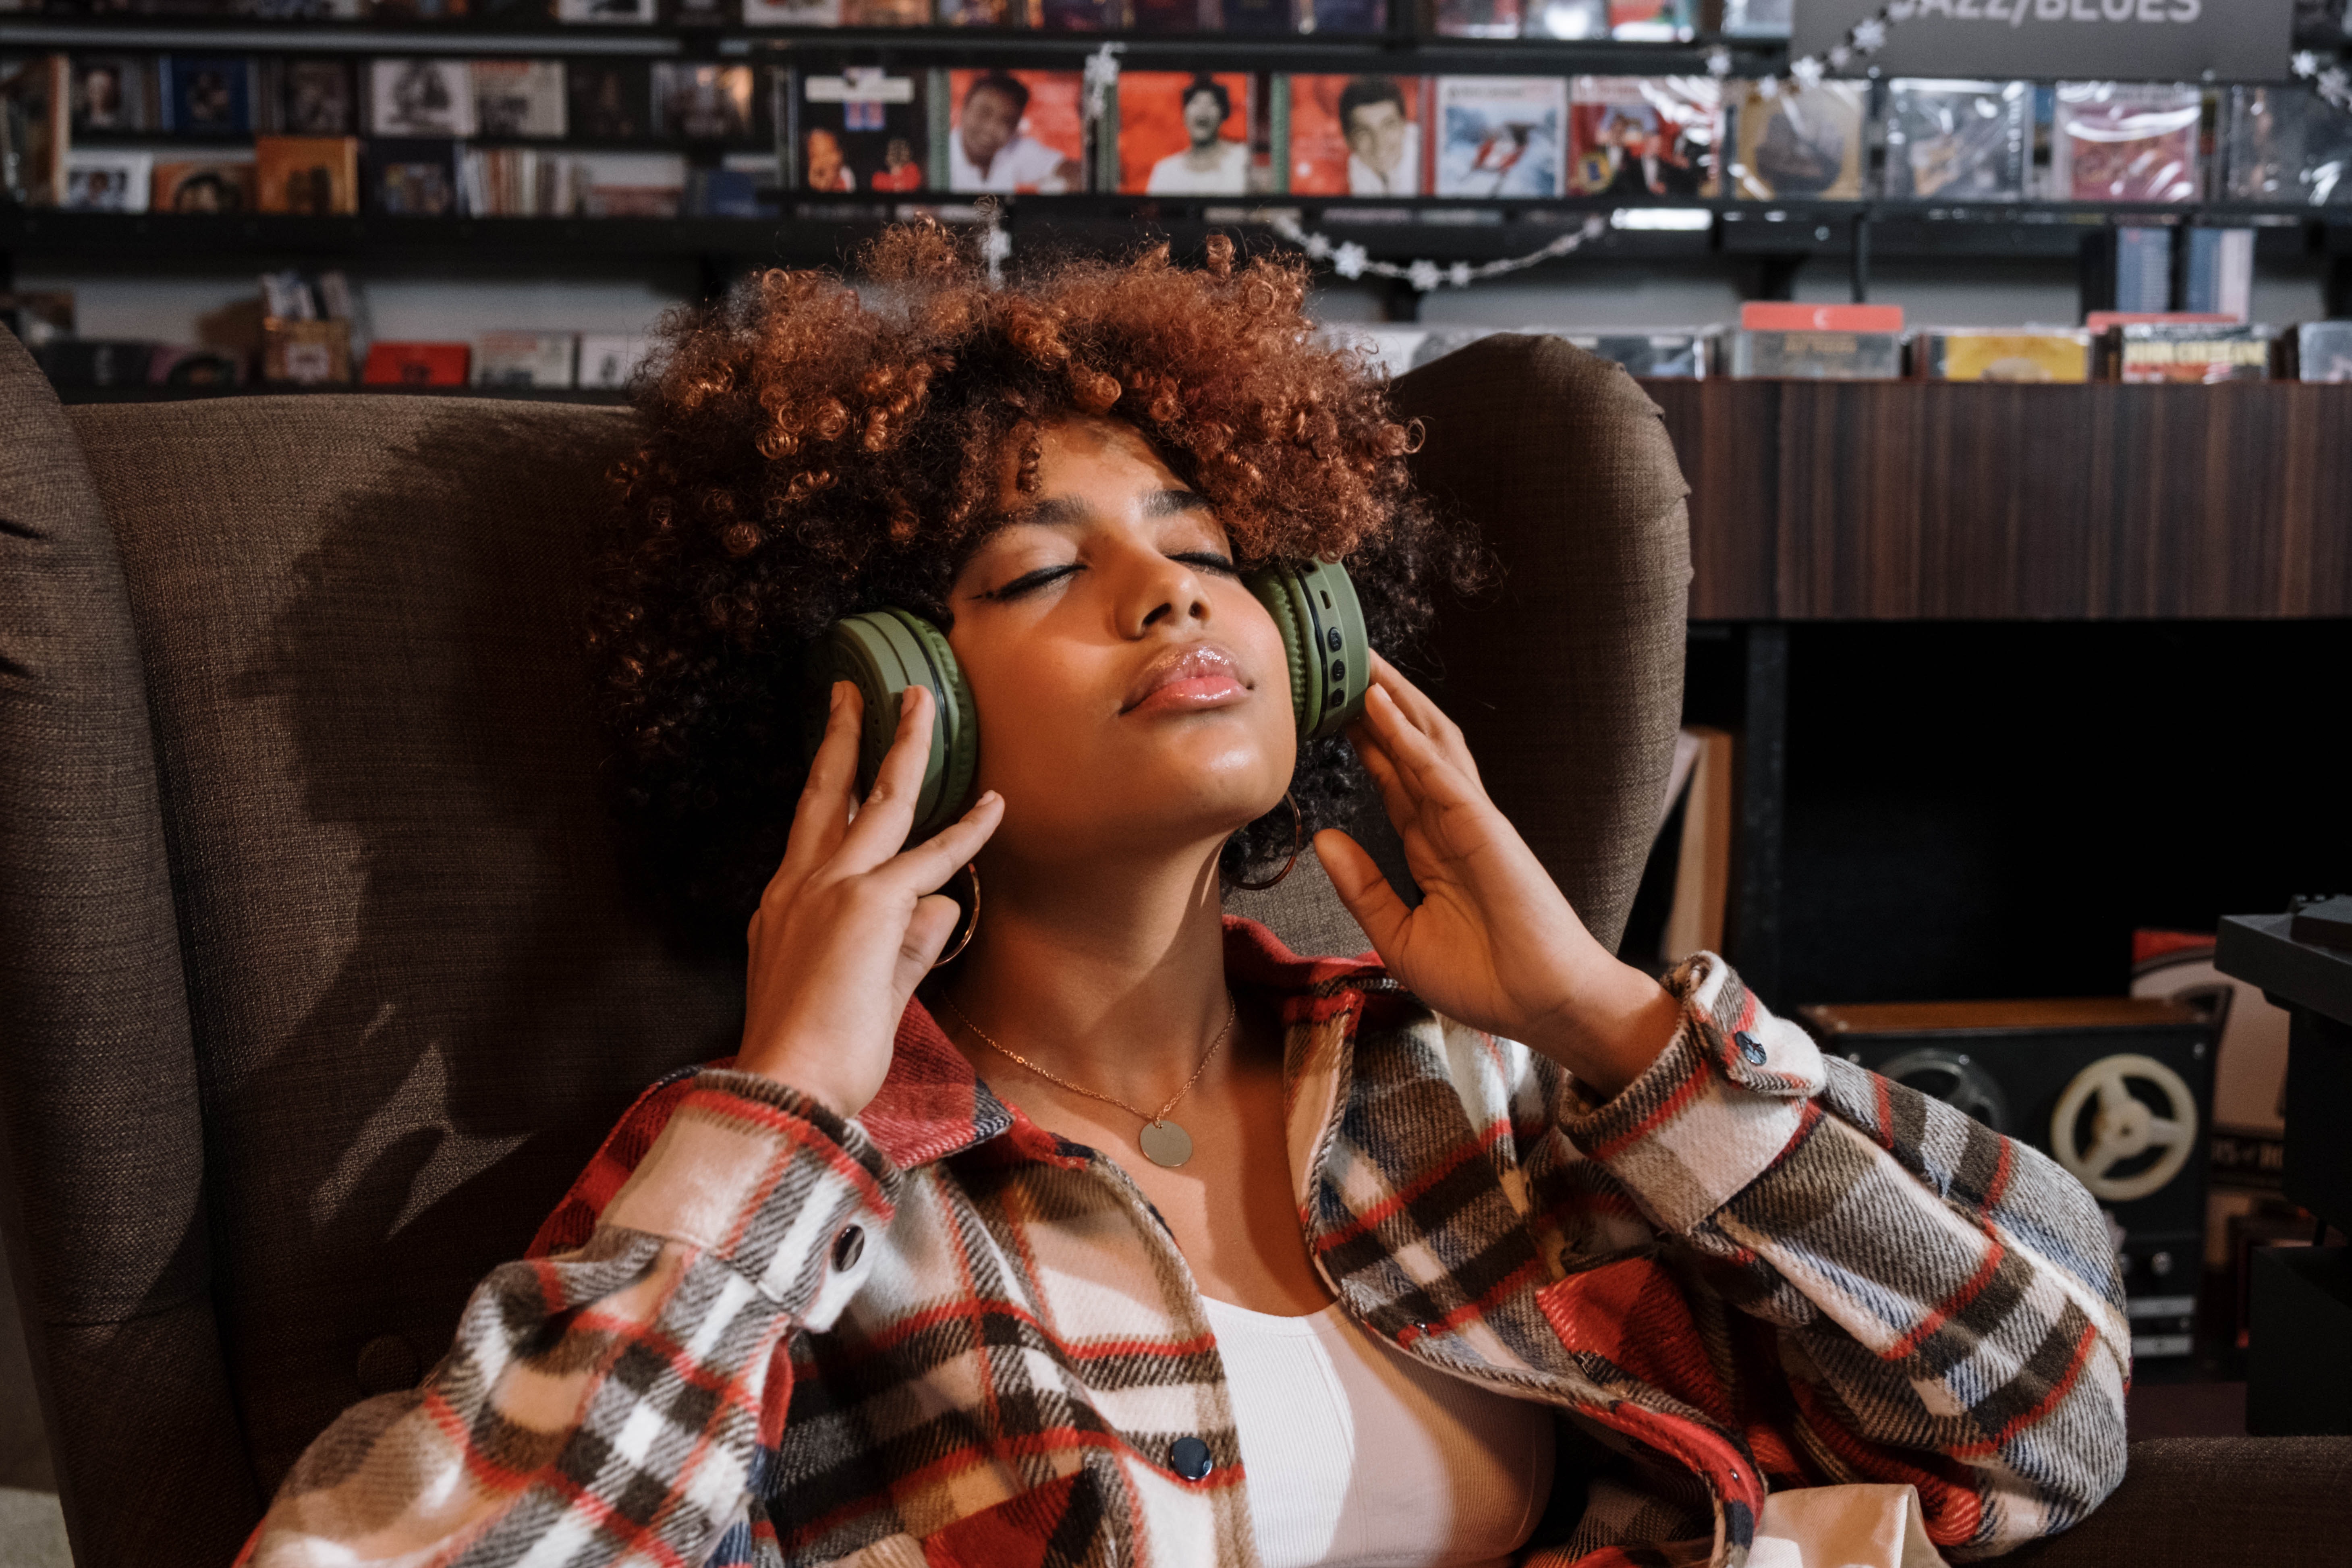 A woman listening to music. | Source: Pexels